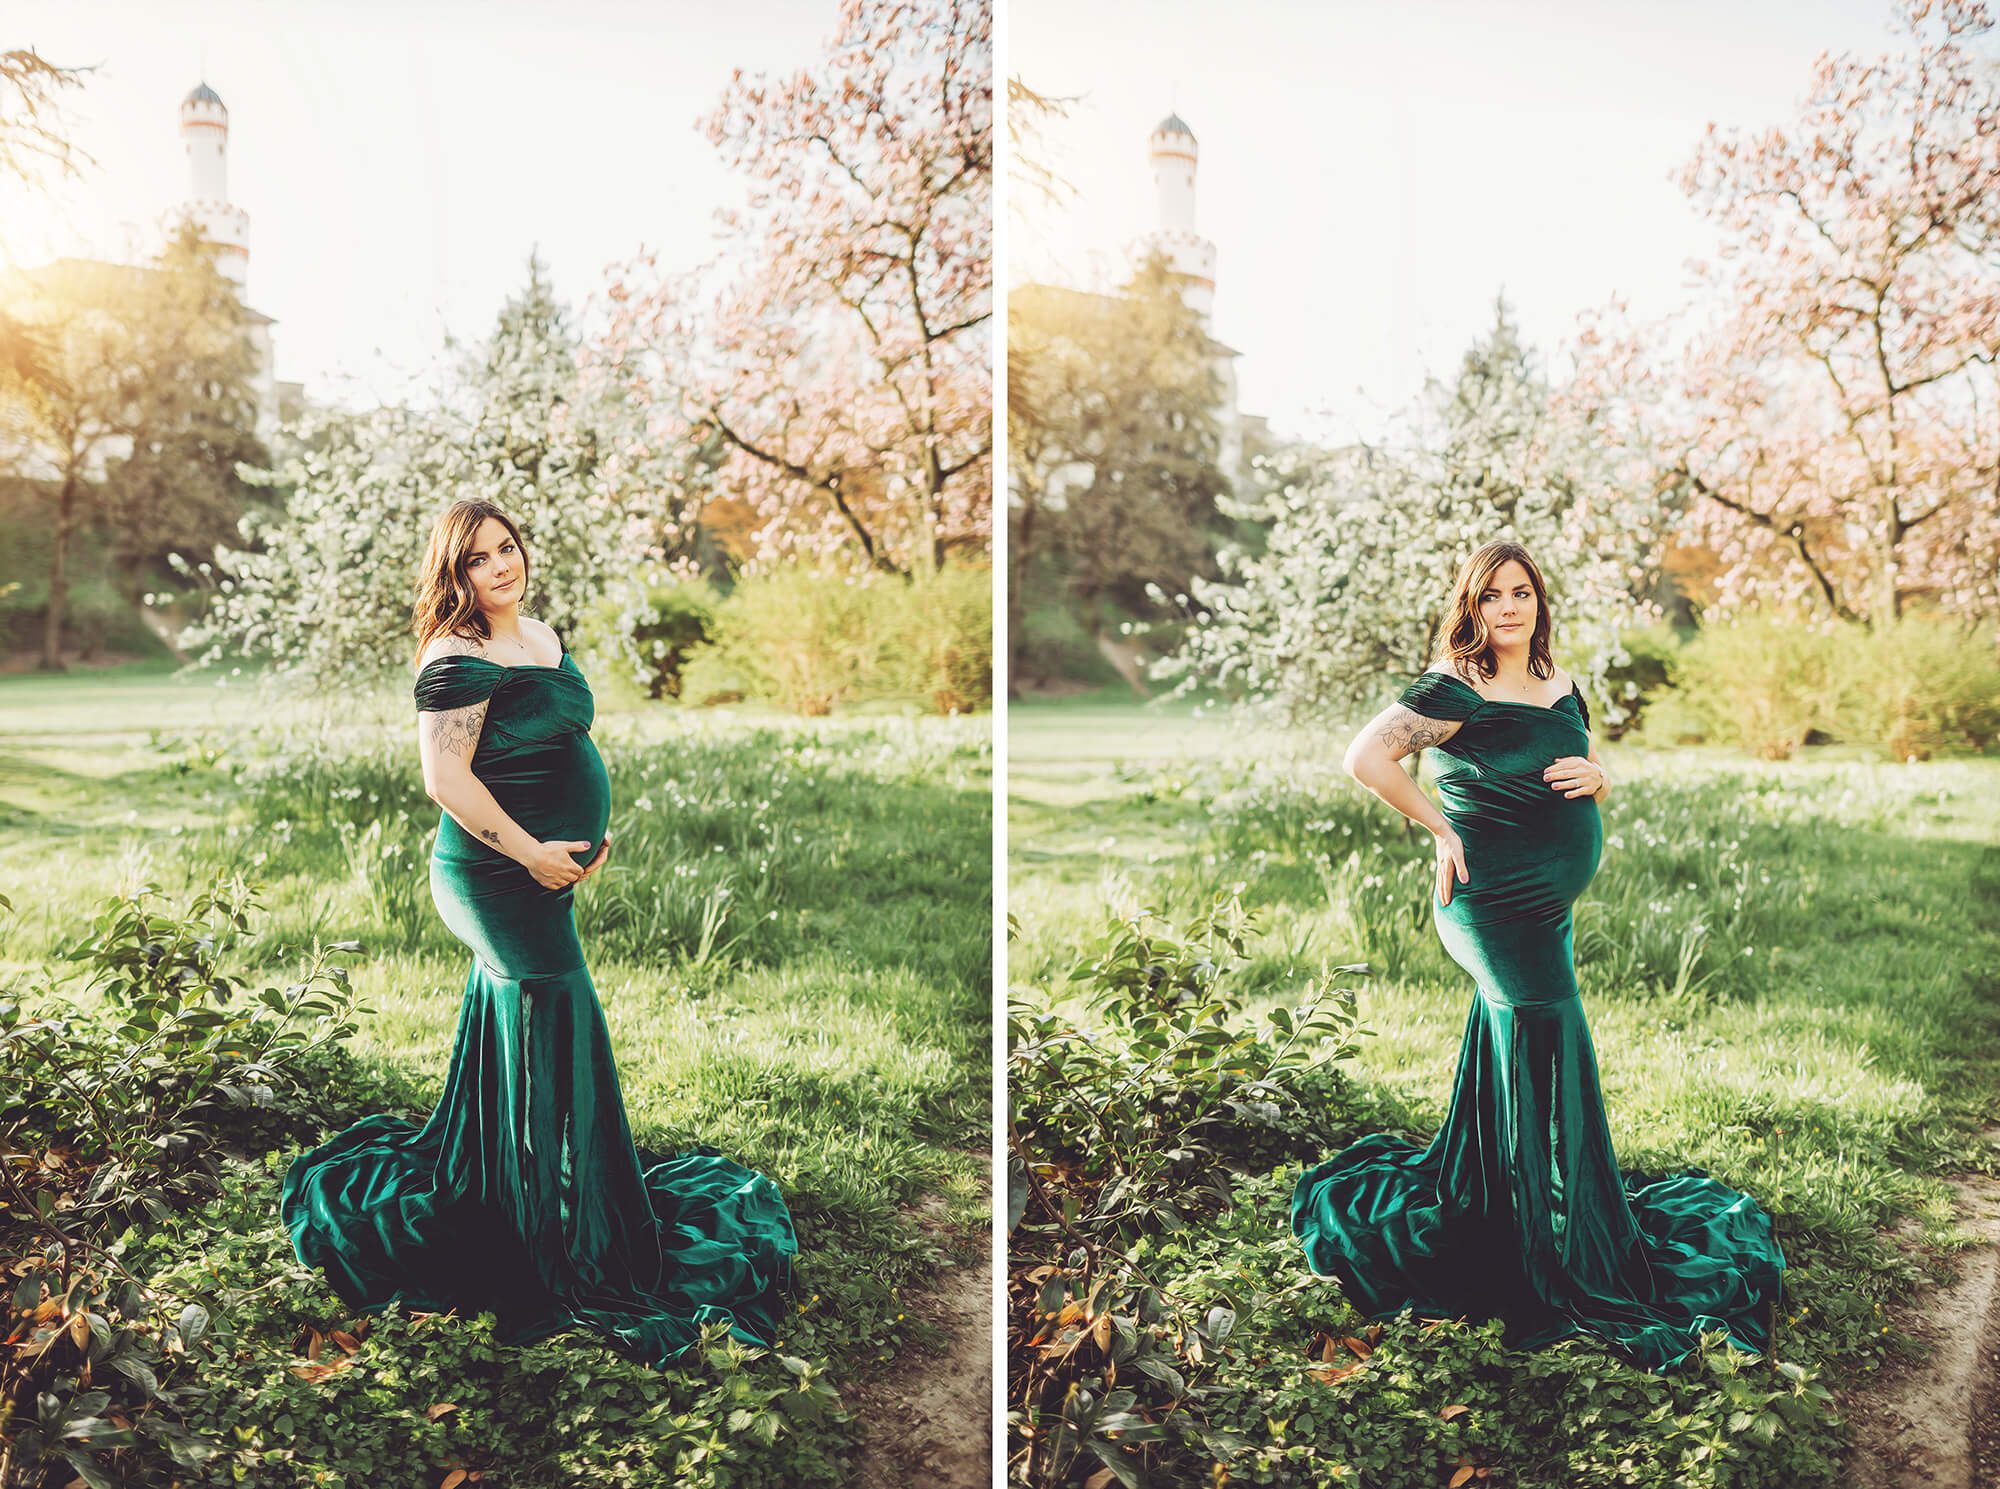 Schloss Bad Homburg in the background of this beautiful spring maternity session